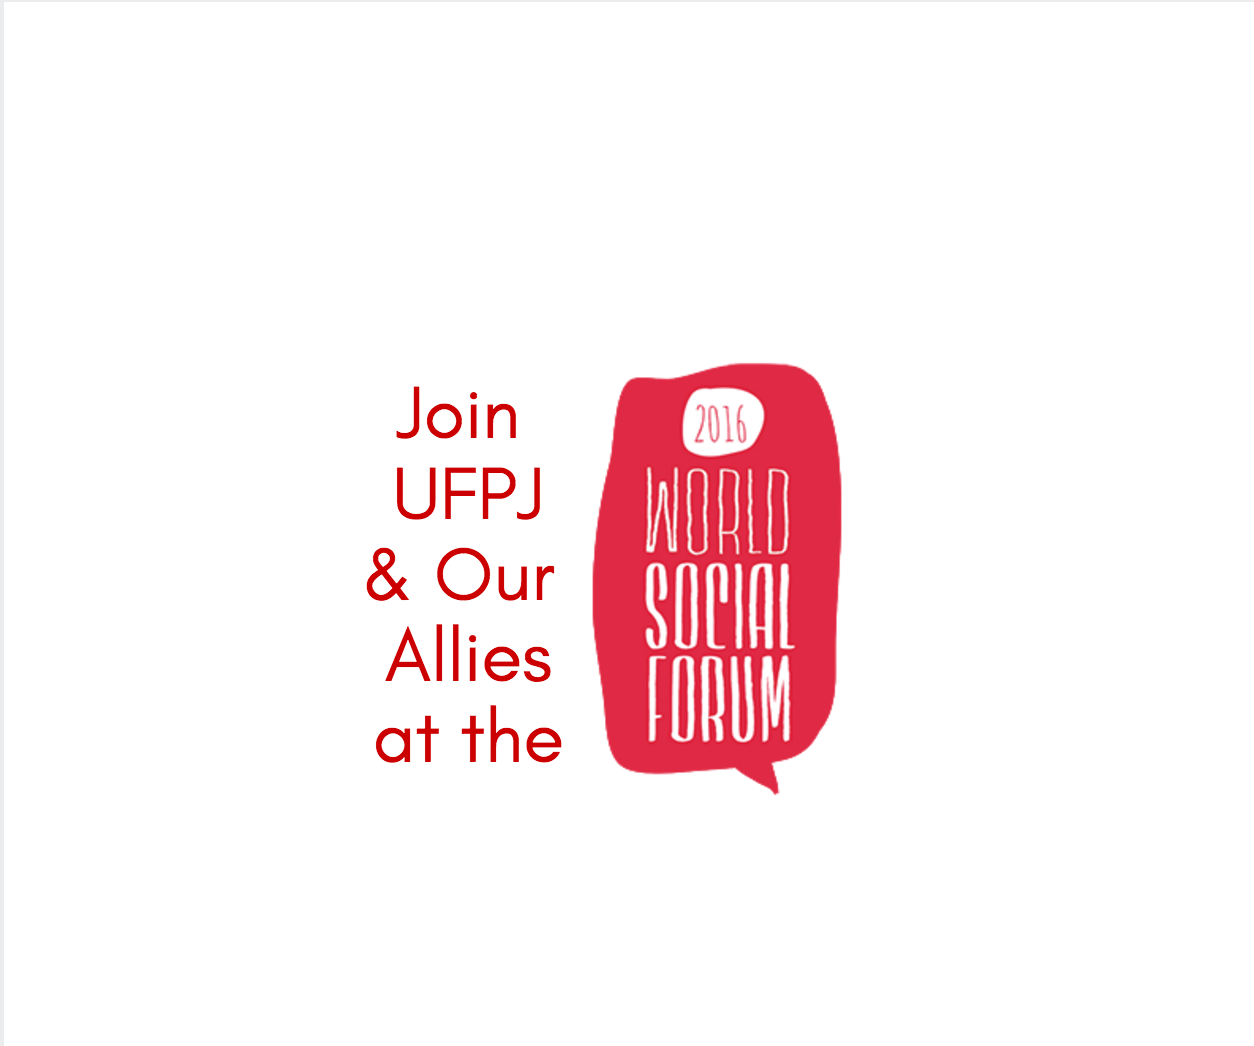 Join UFPJ Allies at the World Social Forum in Montreal Aug. 9-14